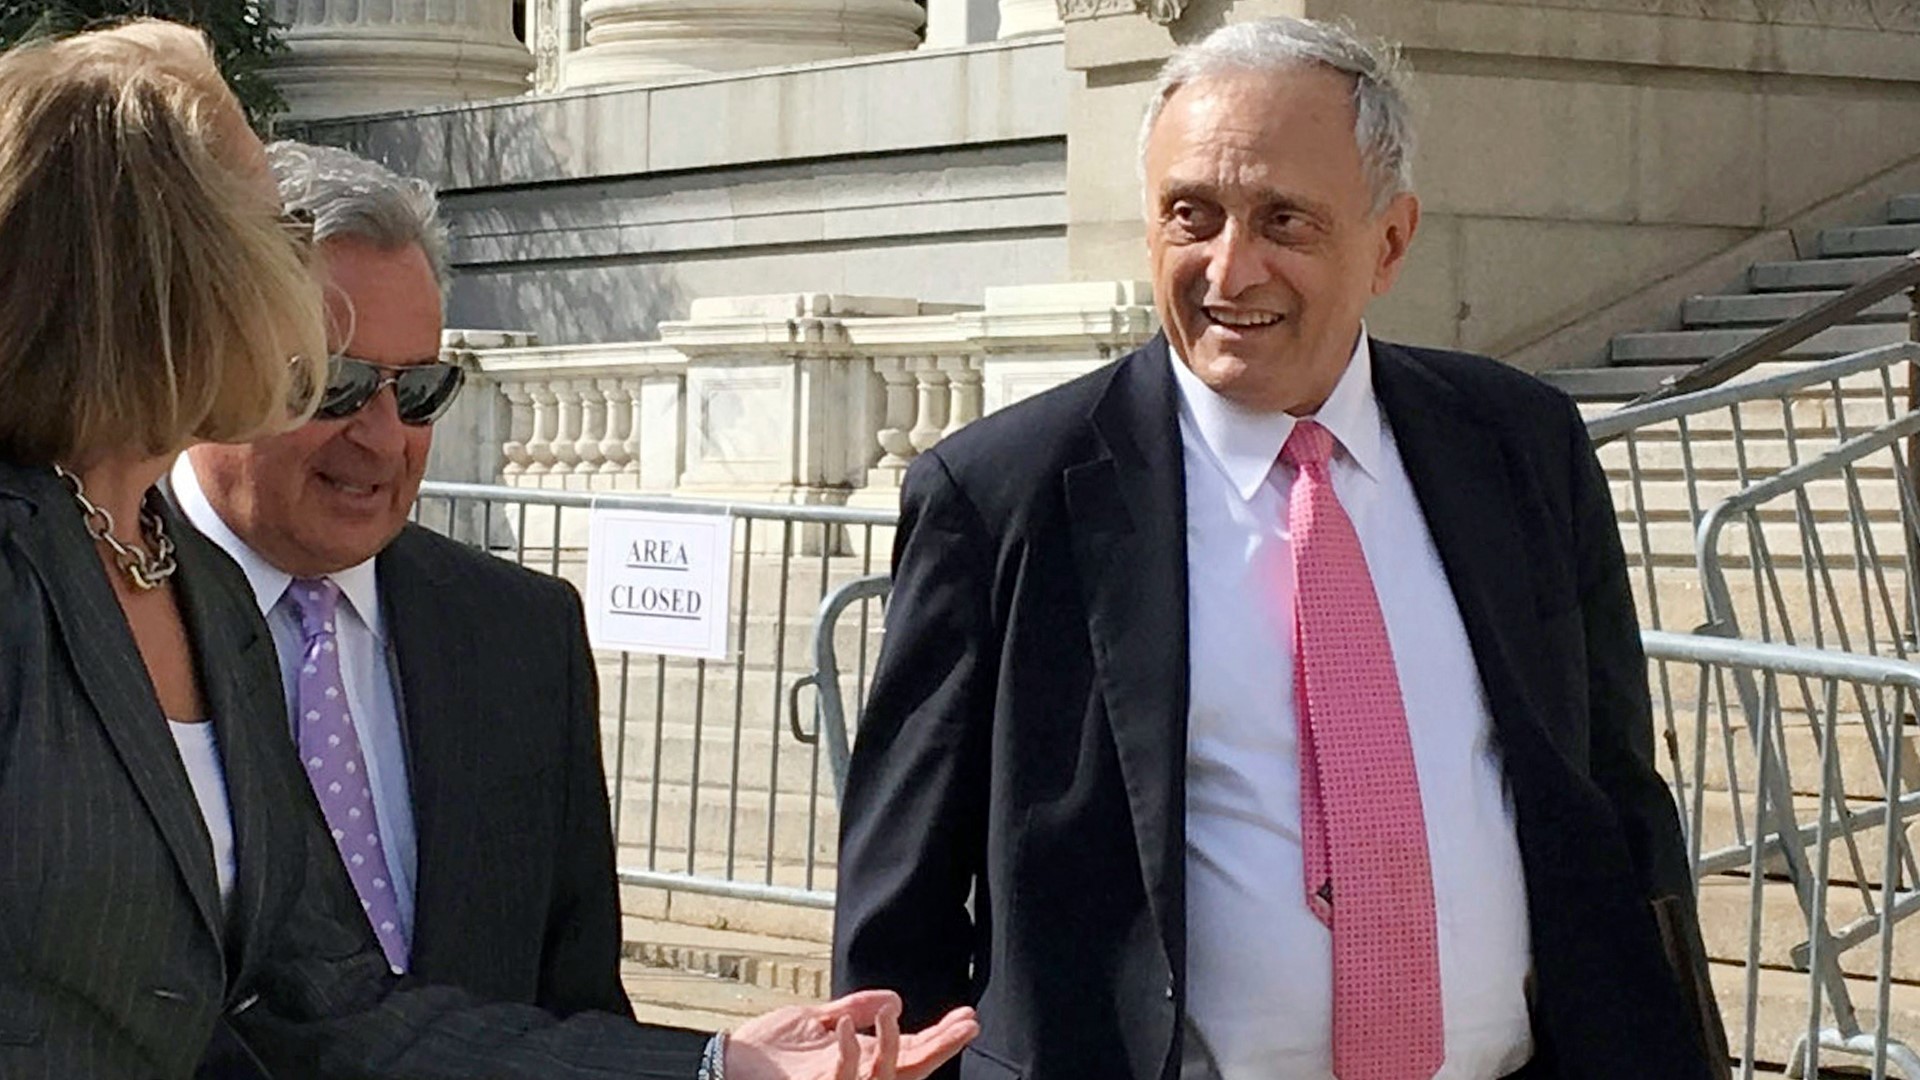 2 On Your Side sat down with NY-23 candidate Carl Paladino for an exclusive one-on-one interview.